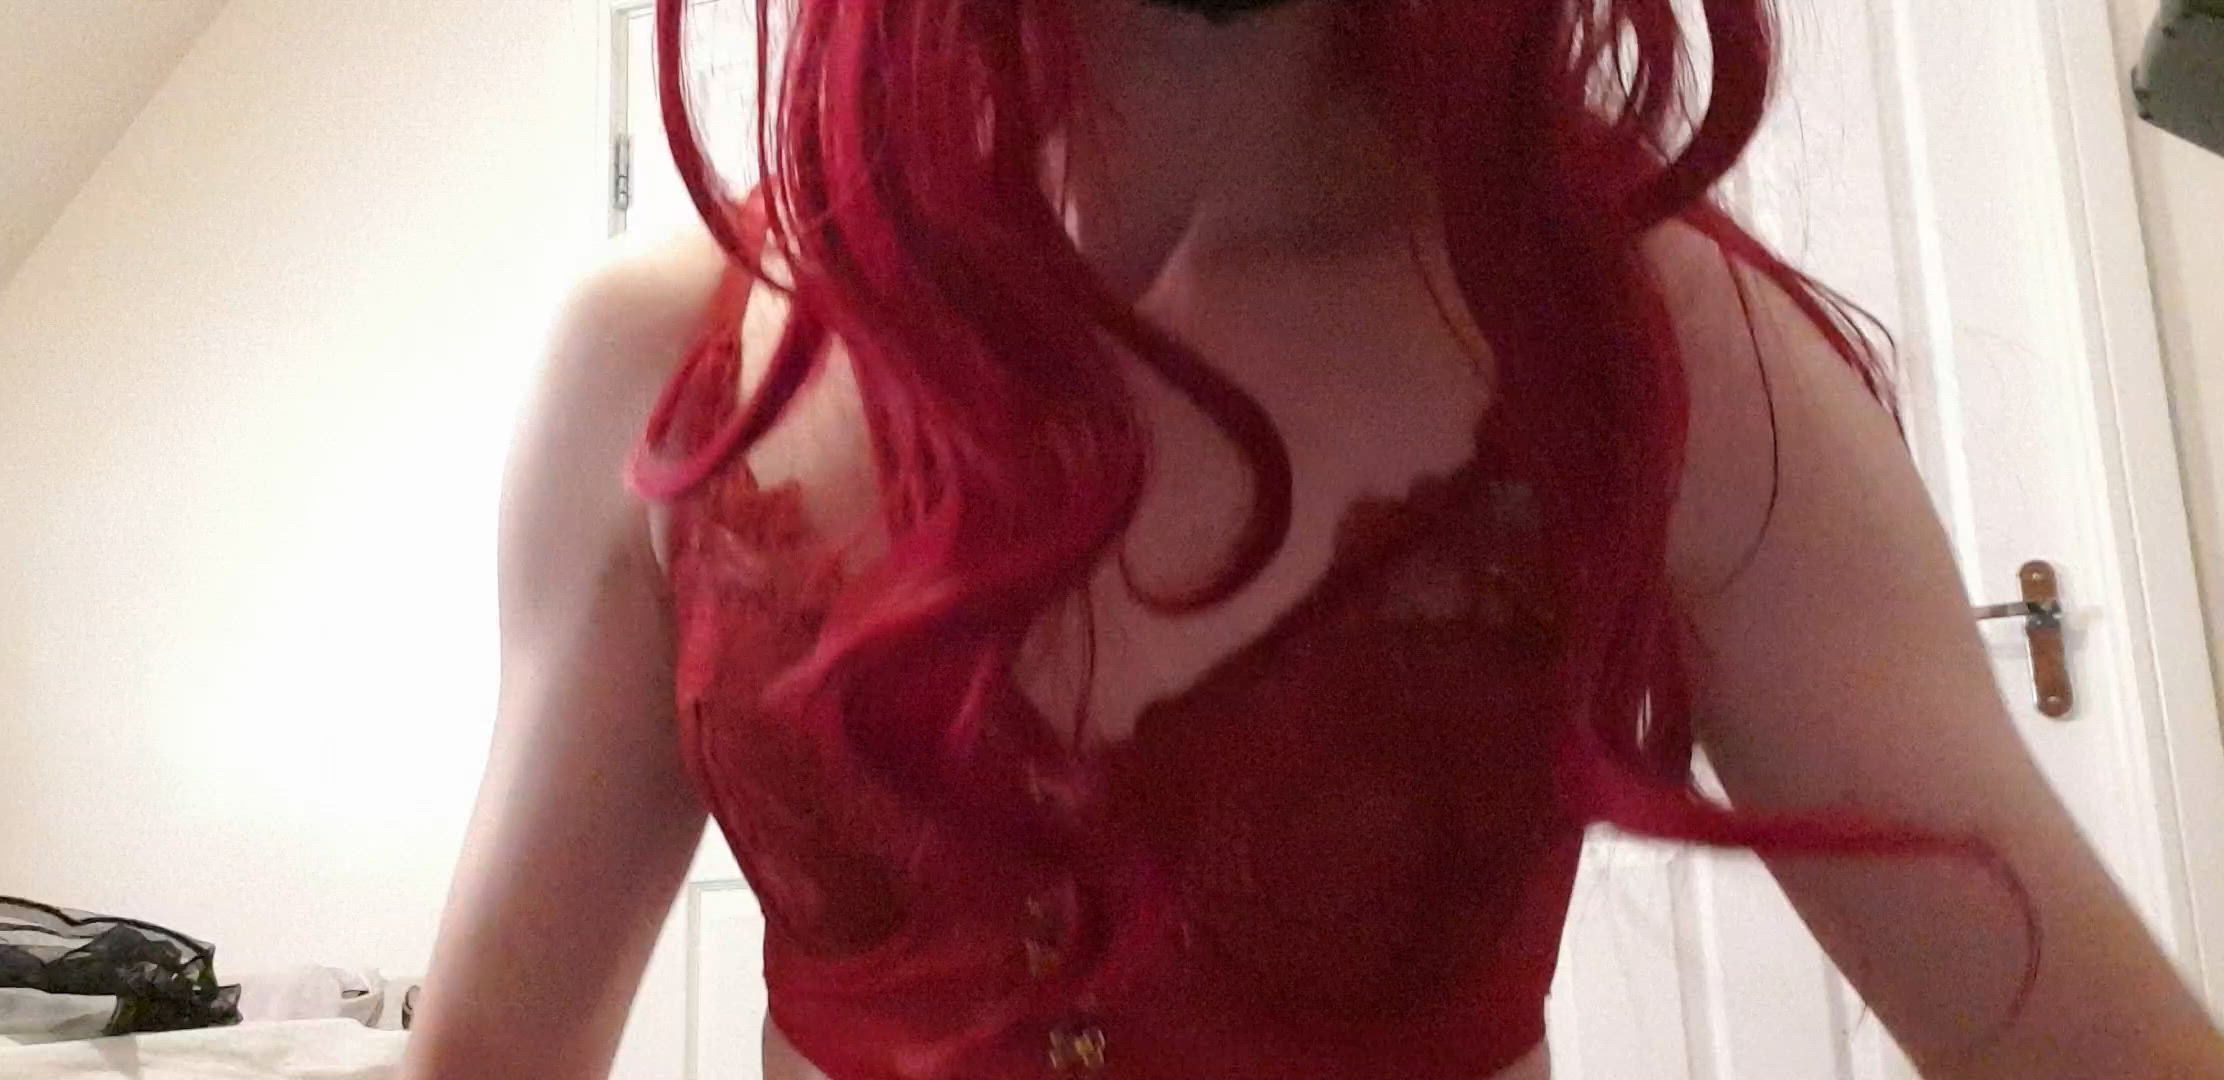 Amateur porn video with onlyfans model jadethemaskedtrans <strong>@jadethemaskedtrans</strong>